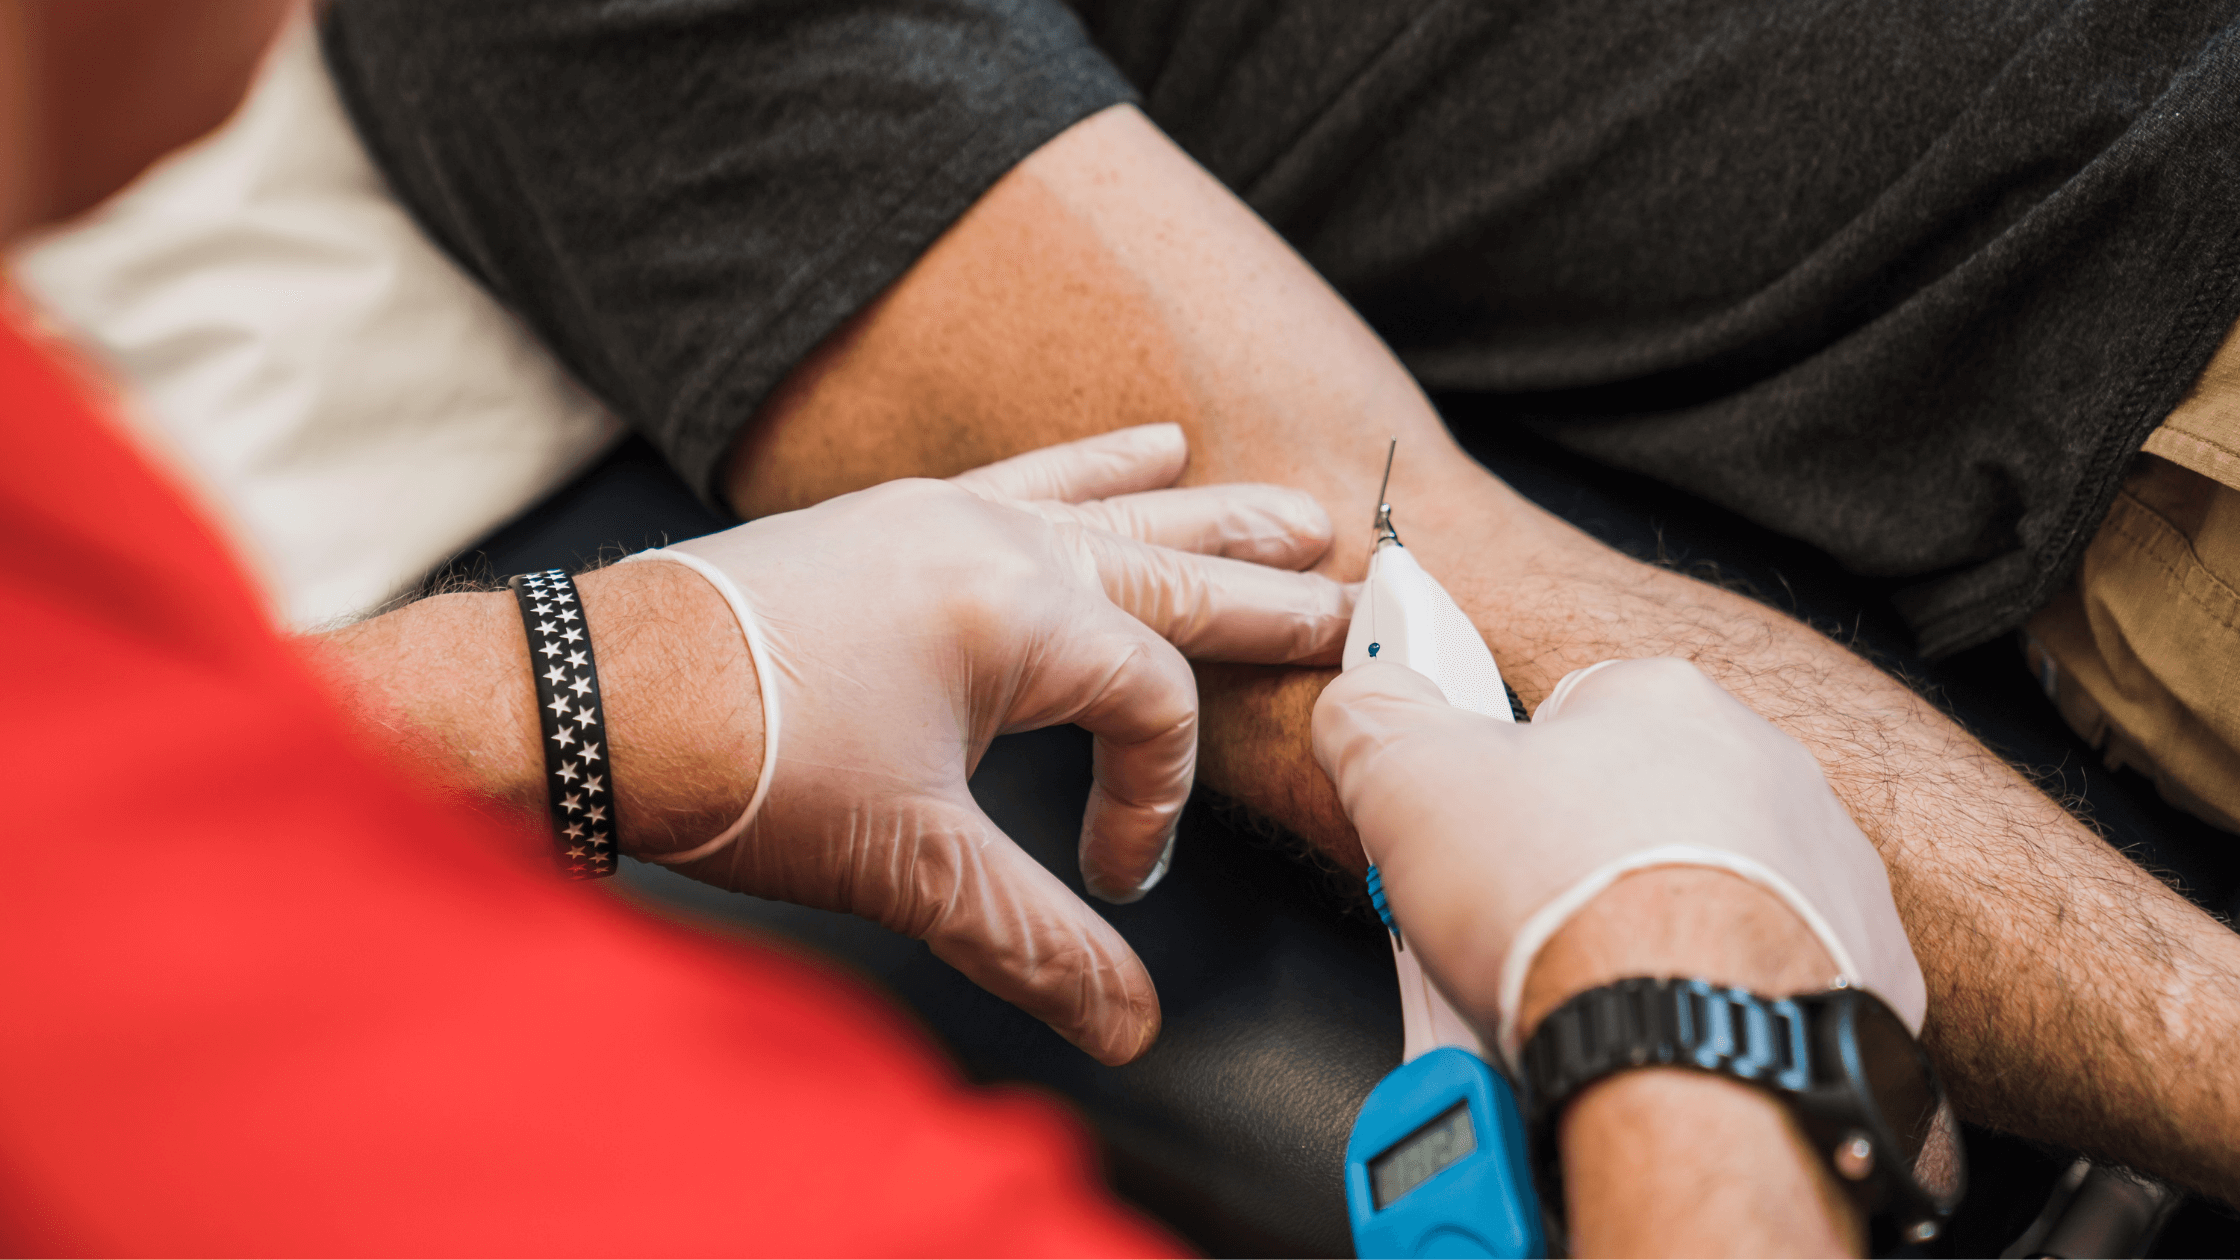 Dry Needling With Electrical Stimulation: Is It Right For You?